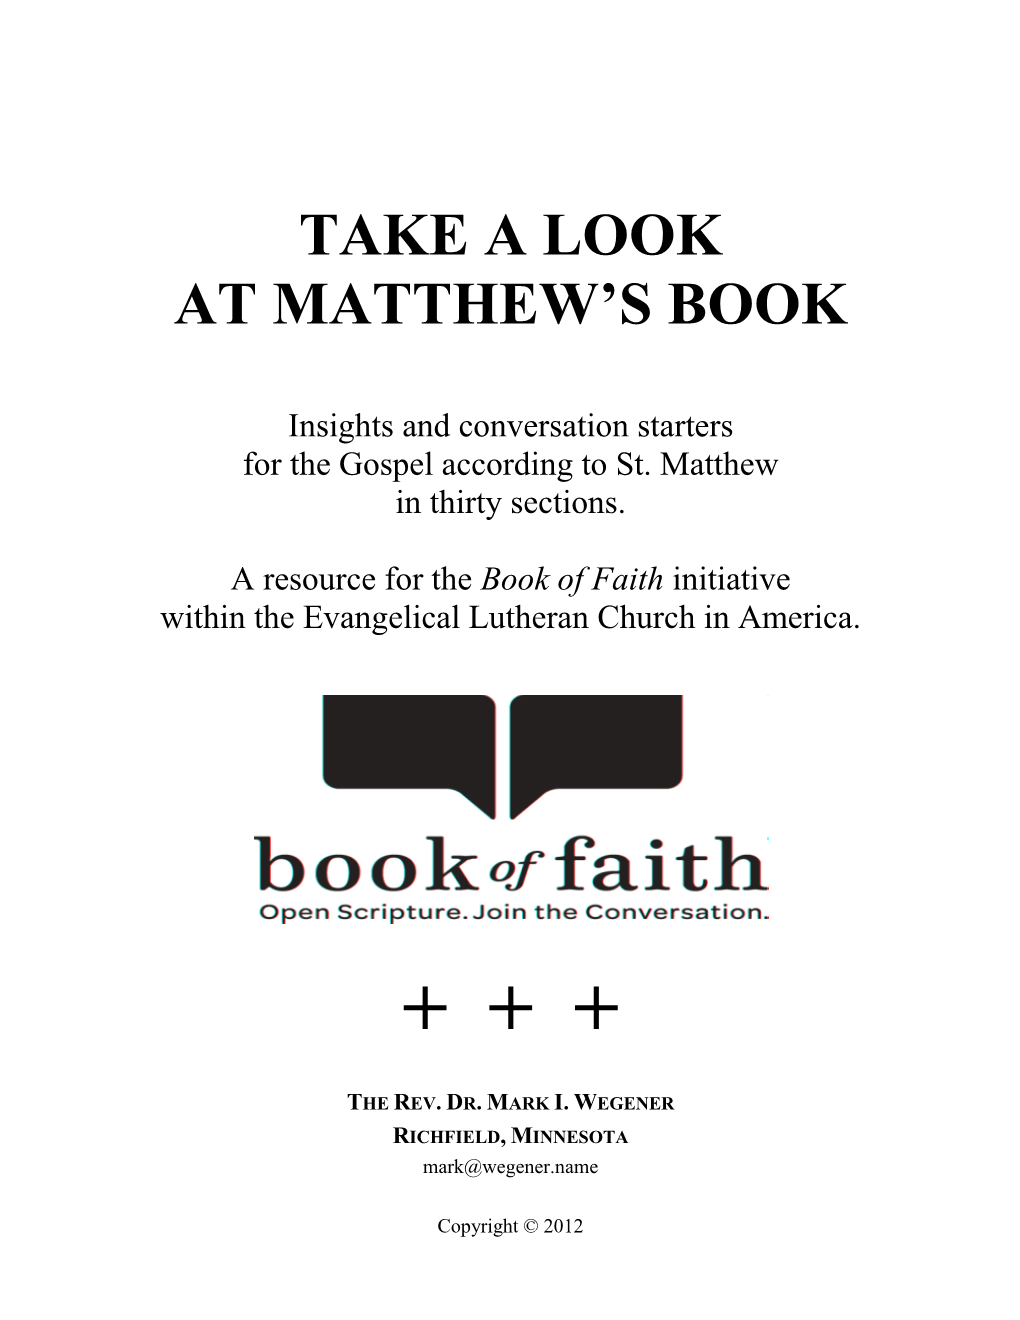 Take a Look at Matthew's Book